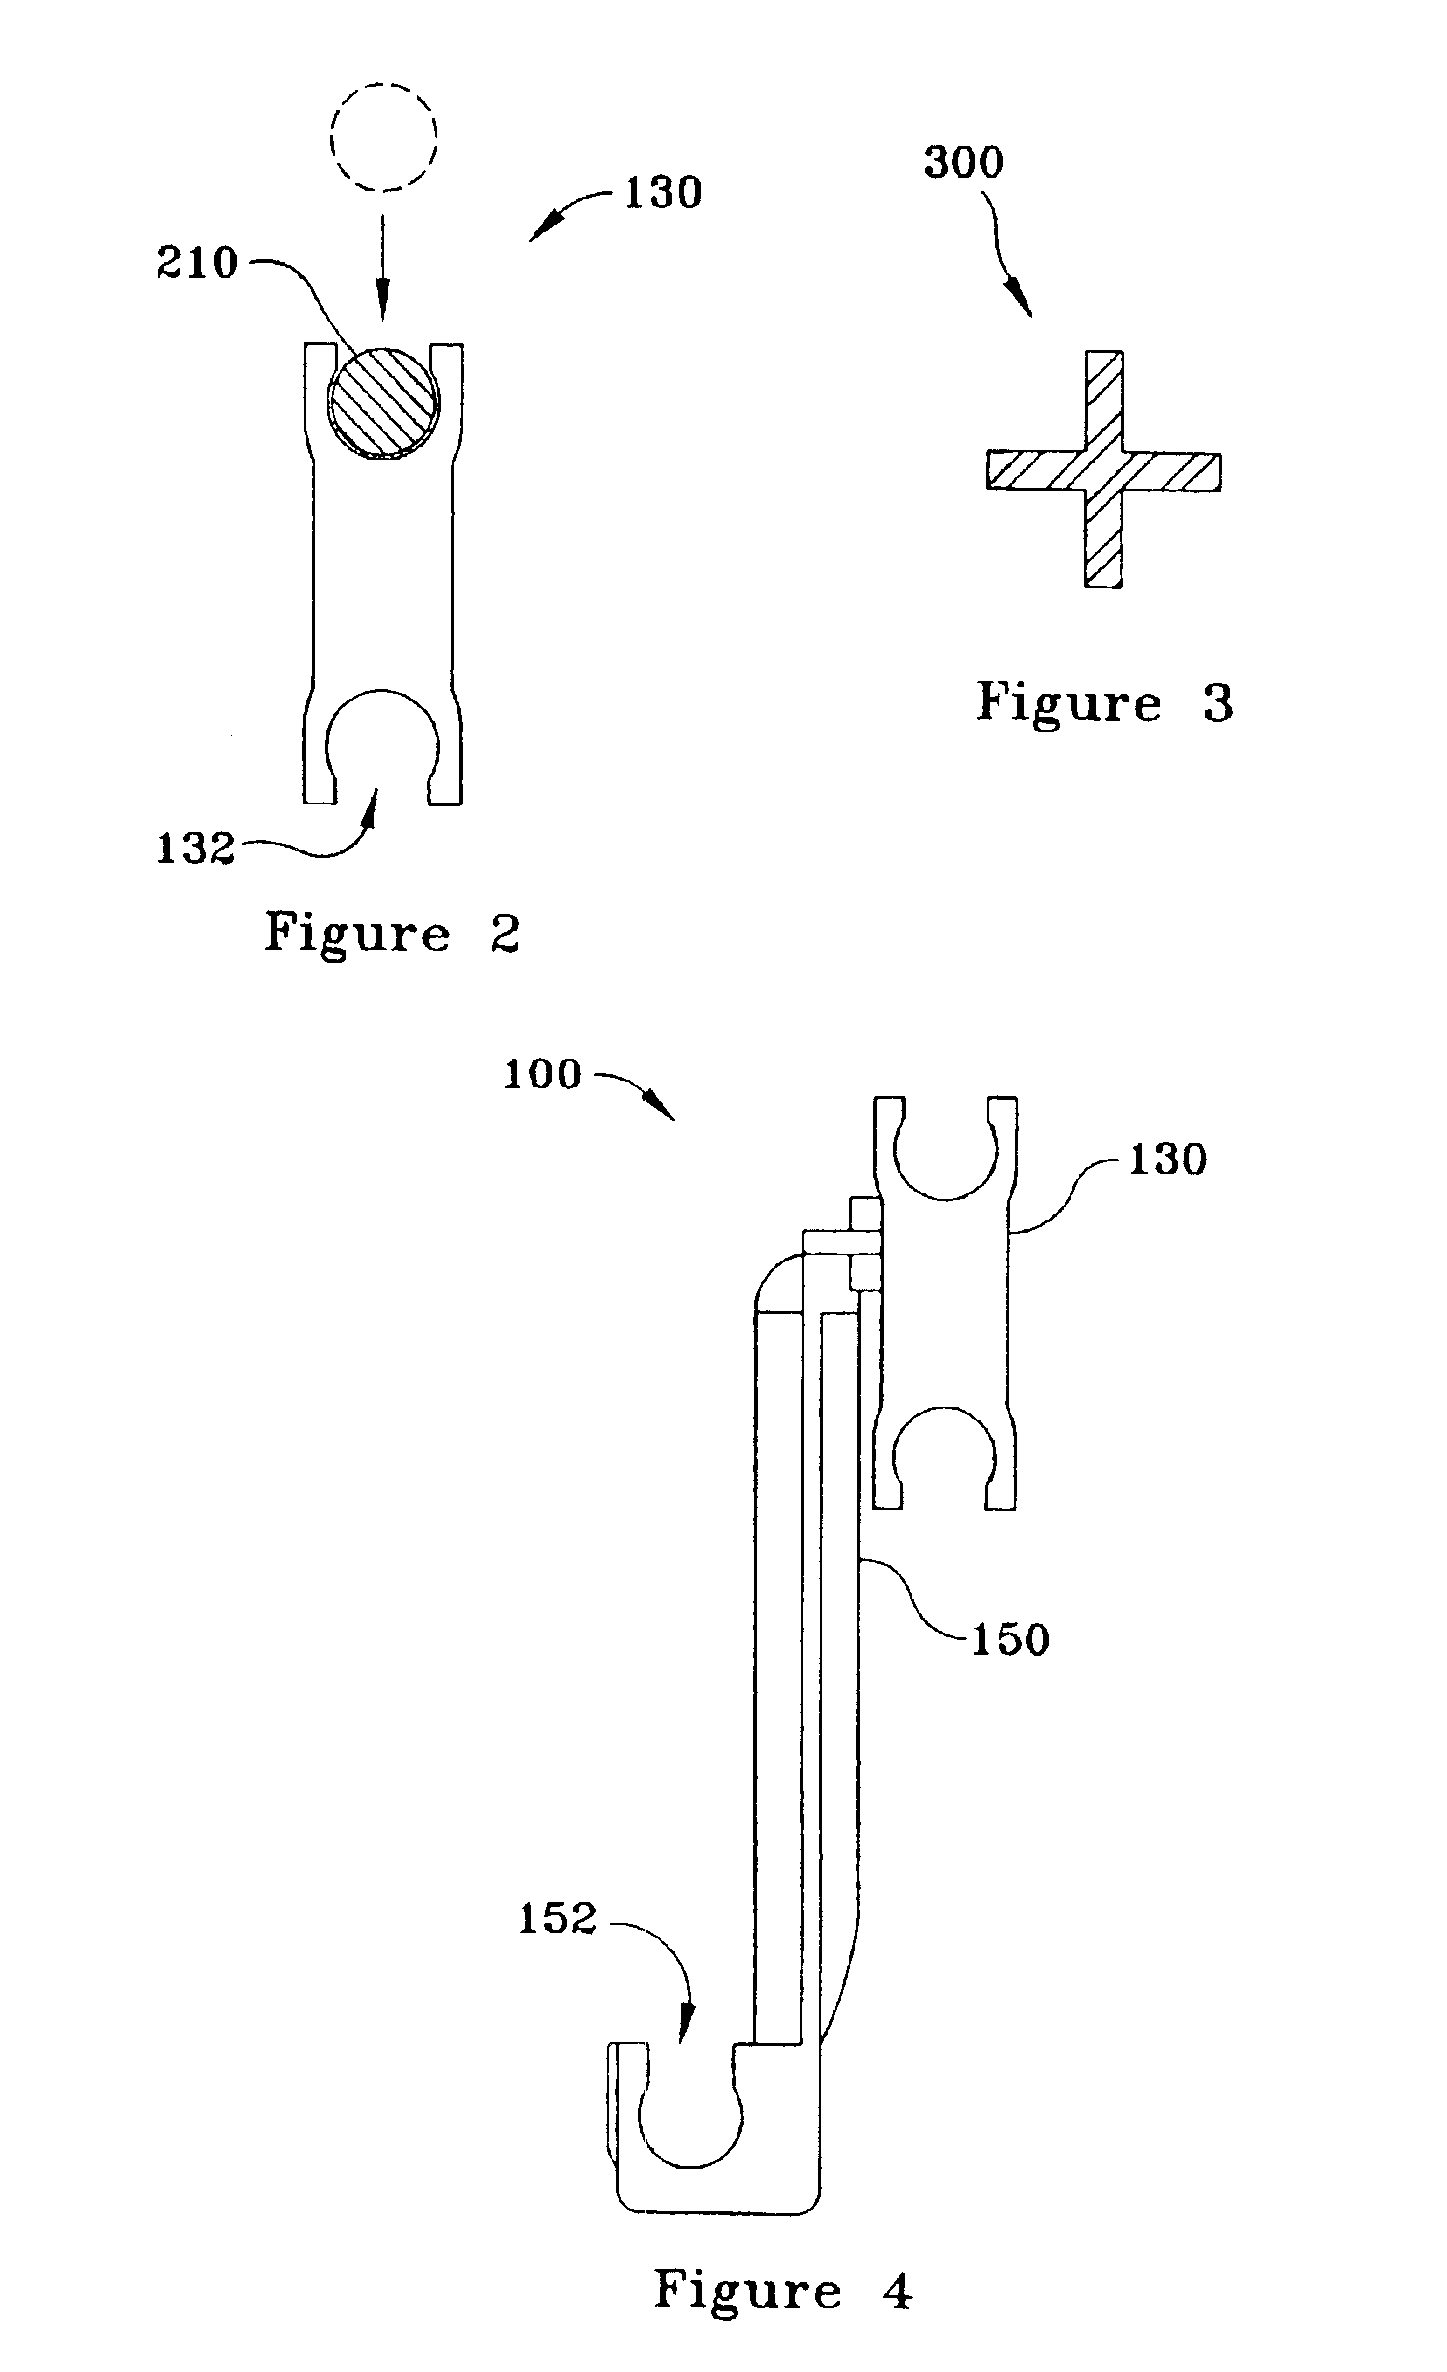 Apparatus and method for reinforcing concrete using rebar supports